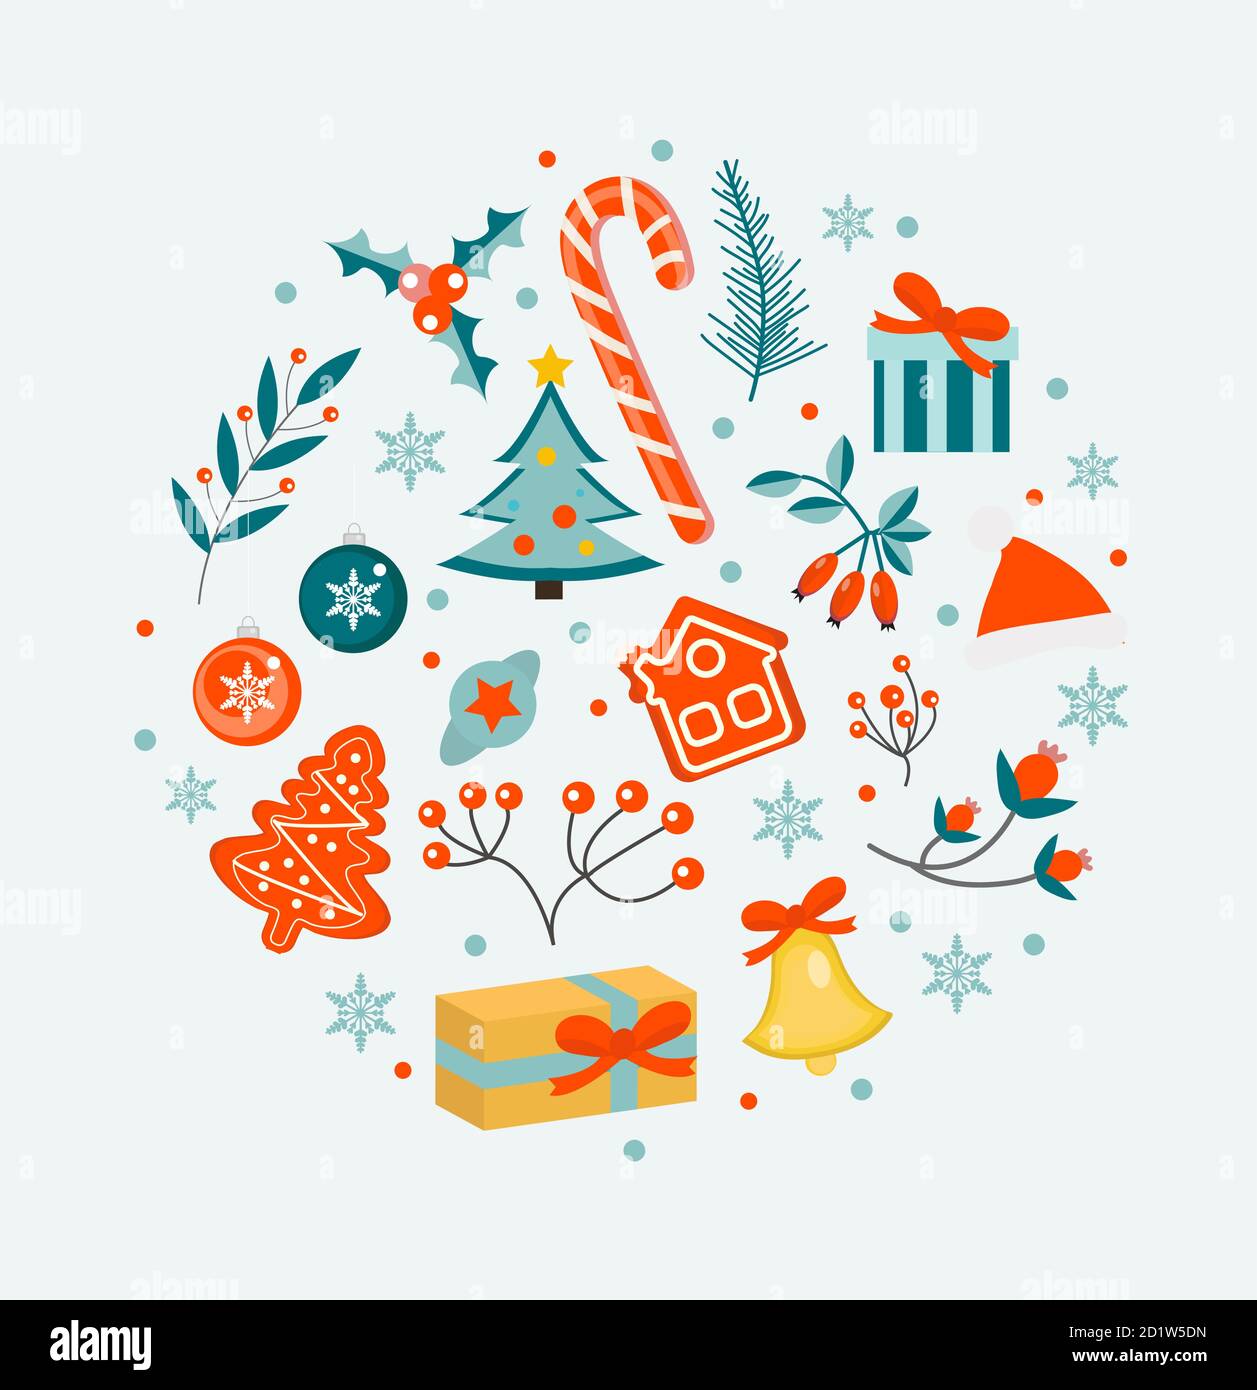 Merry christmas winter objects set. Collection of design elements with holly, poinsettia, fir branch, pine, bell, gifts, santa hat in round shape Stock Vector